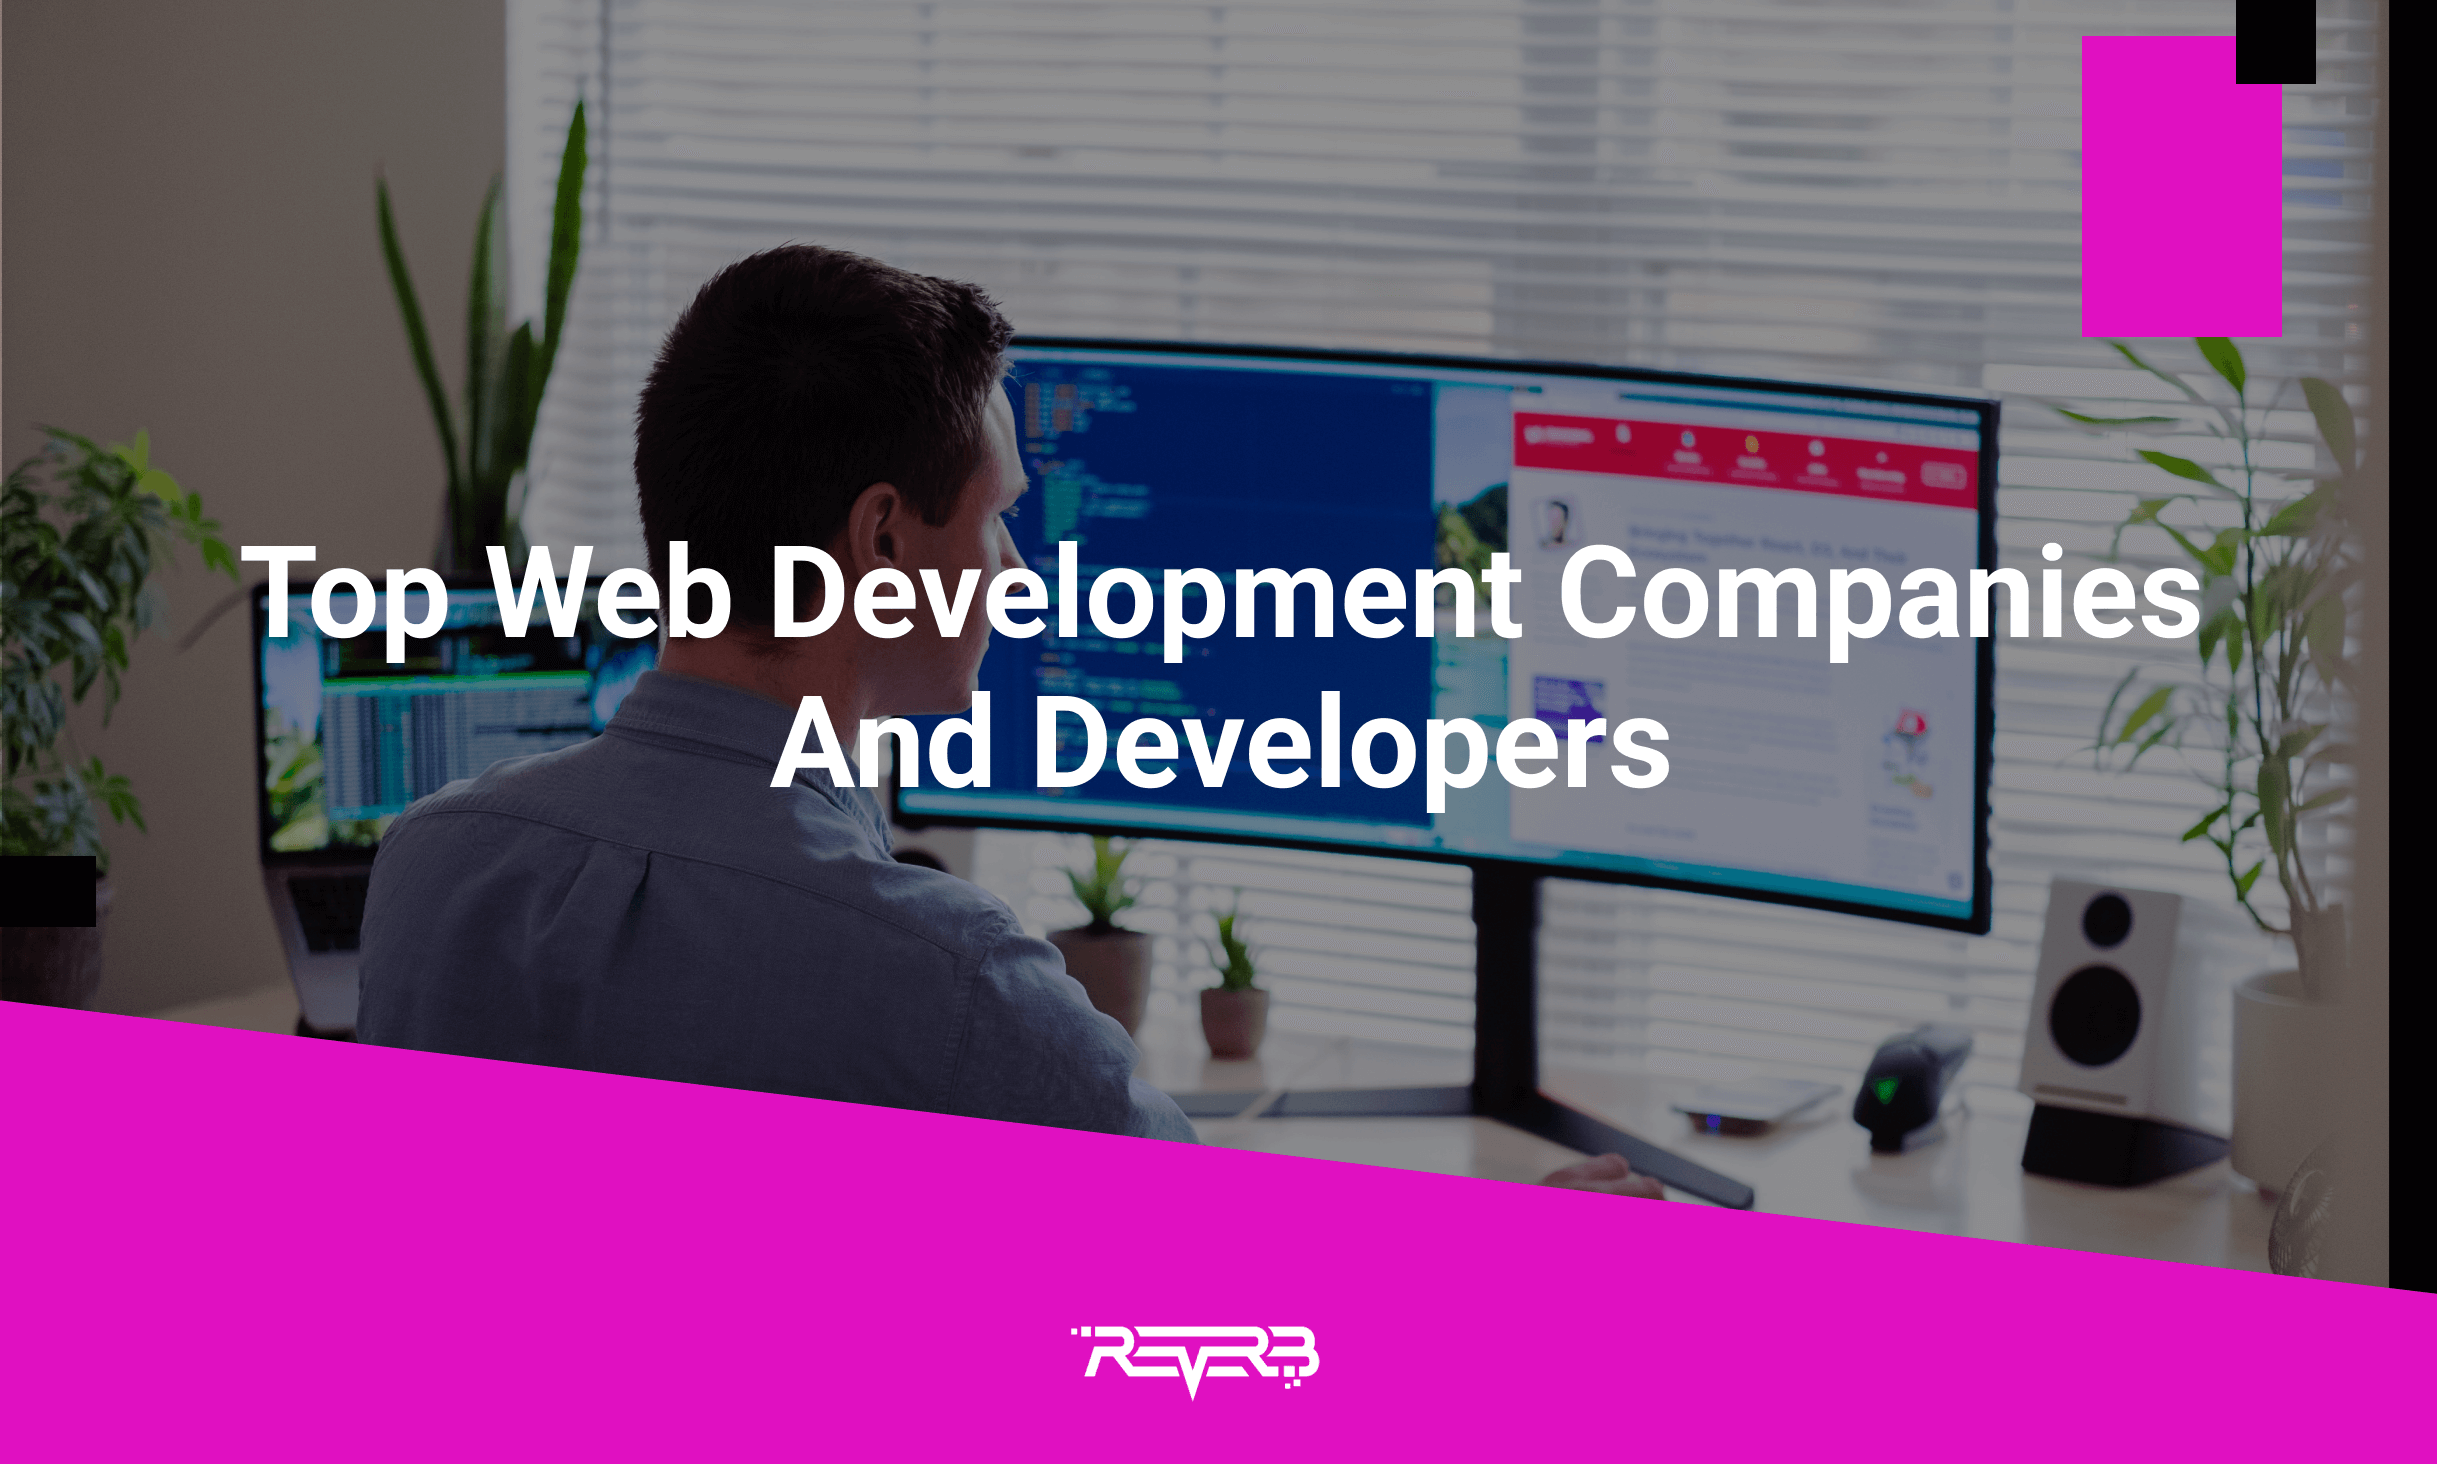 Top Web Development Companies And Developers | REVERB